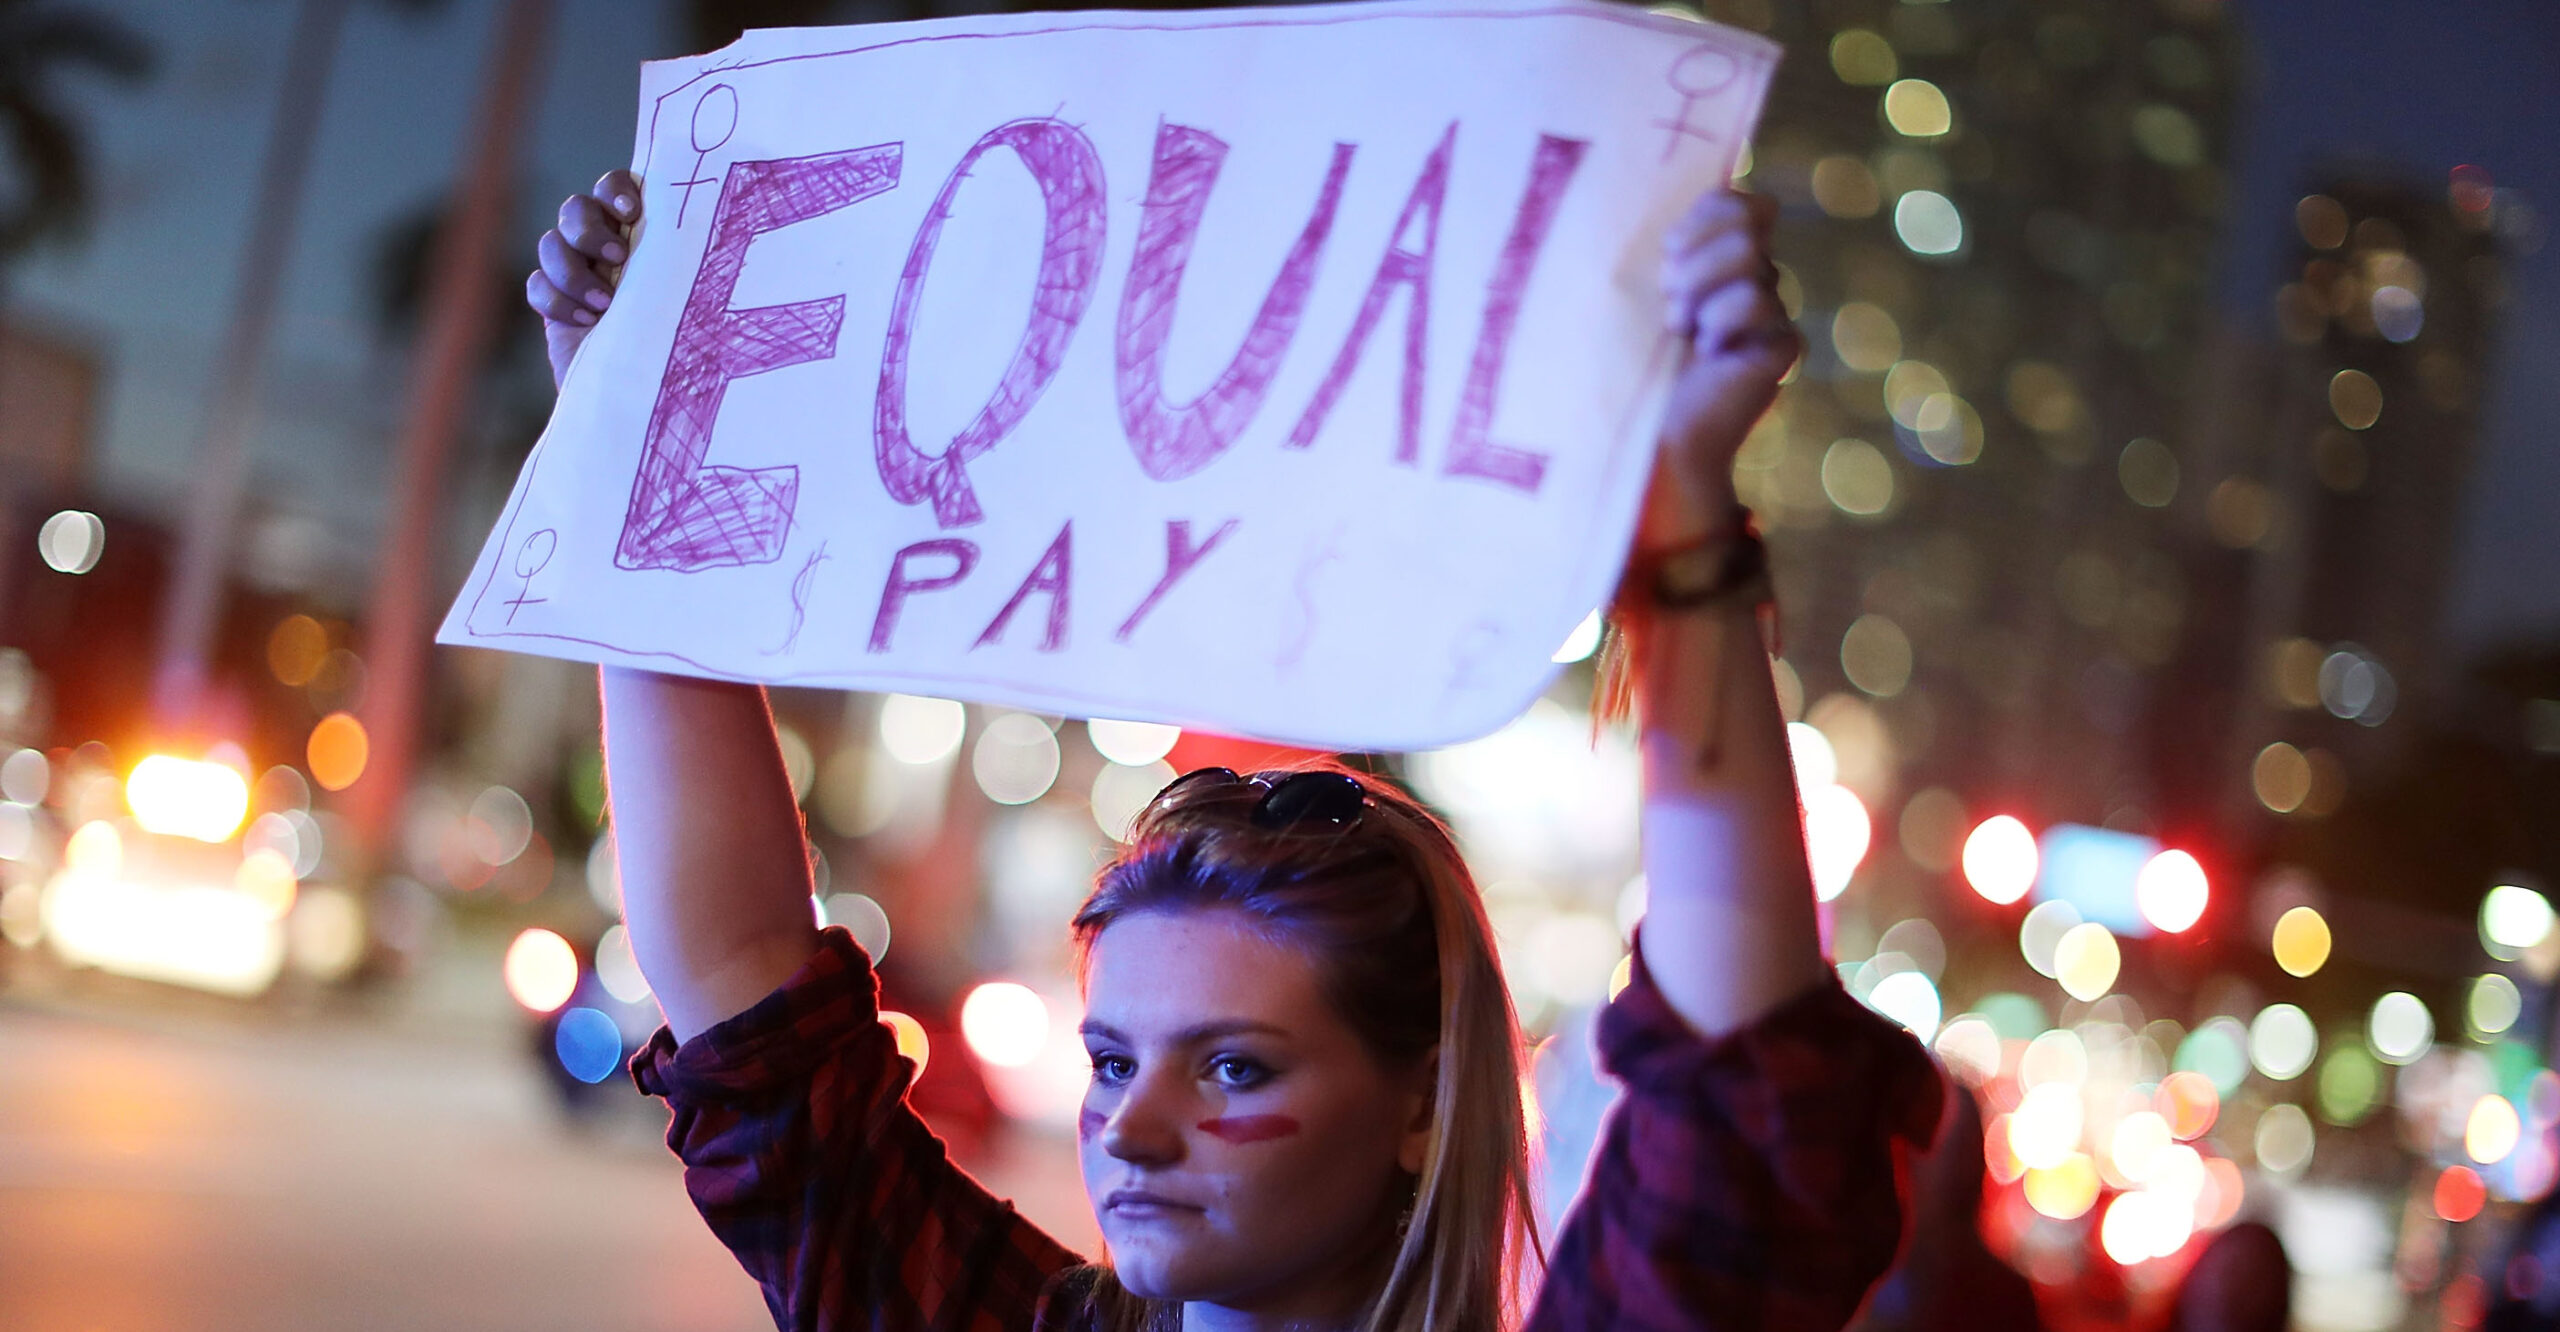 How 'Equal Pay Day' Compares Apples and Oranges